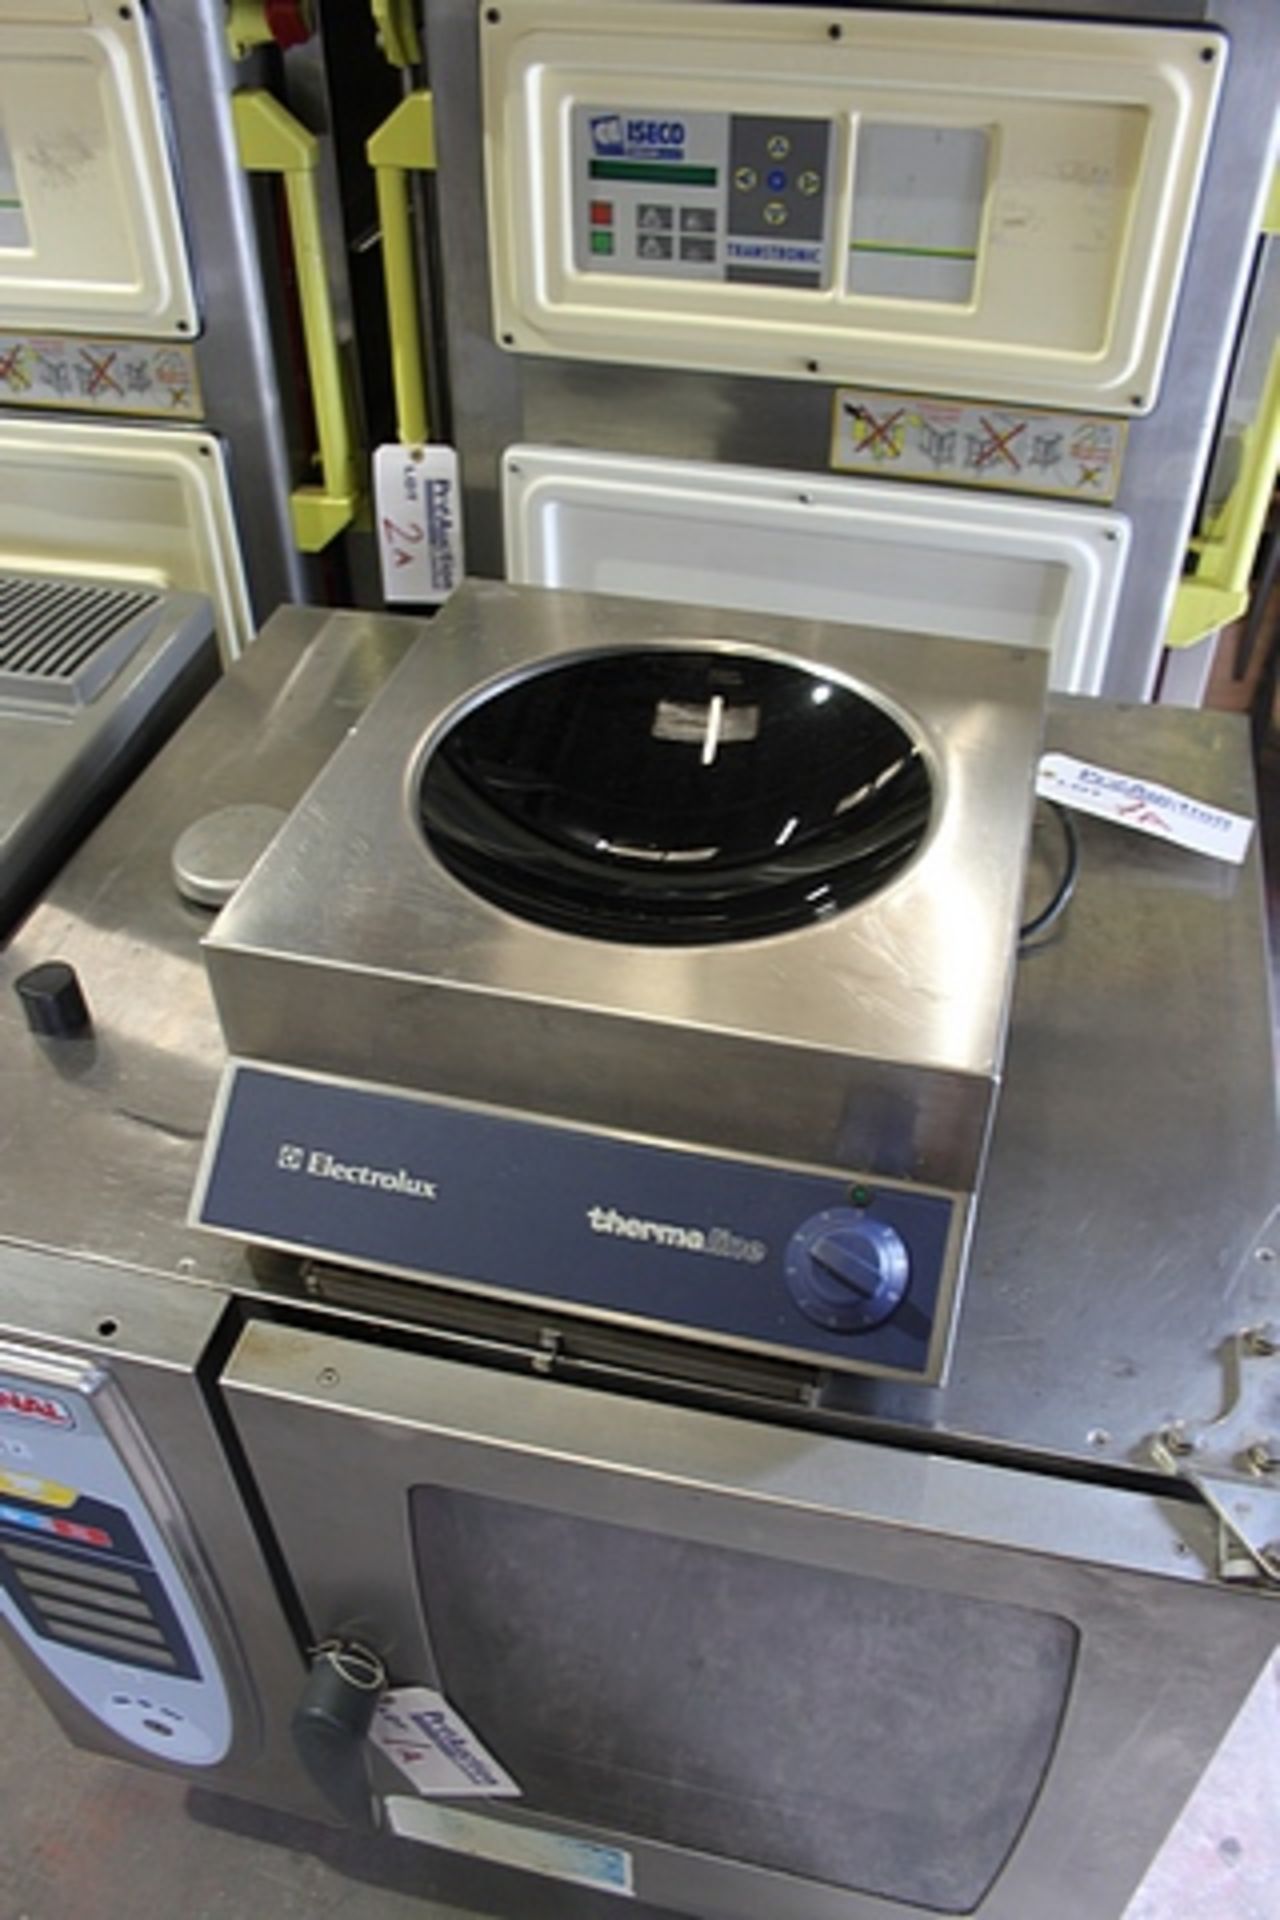 Electrolux thermaline induction wok